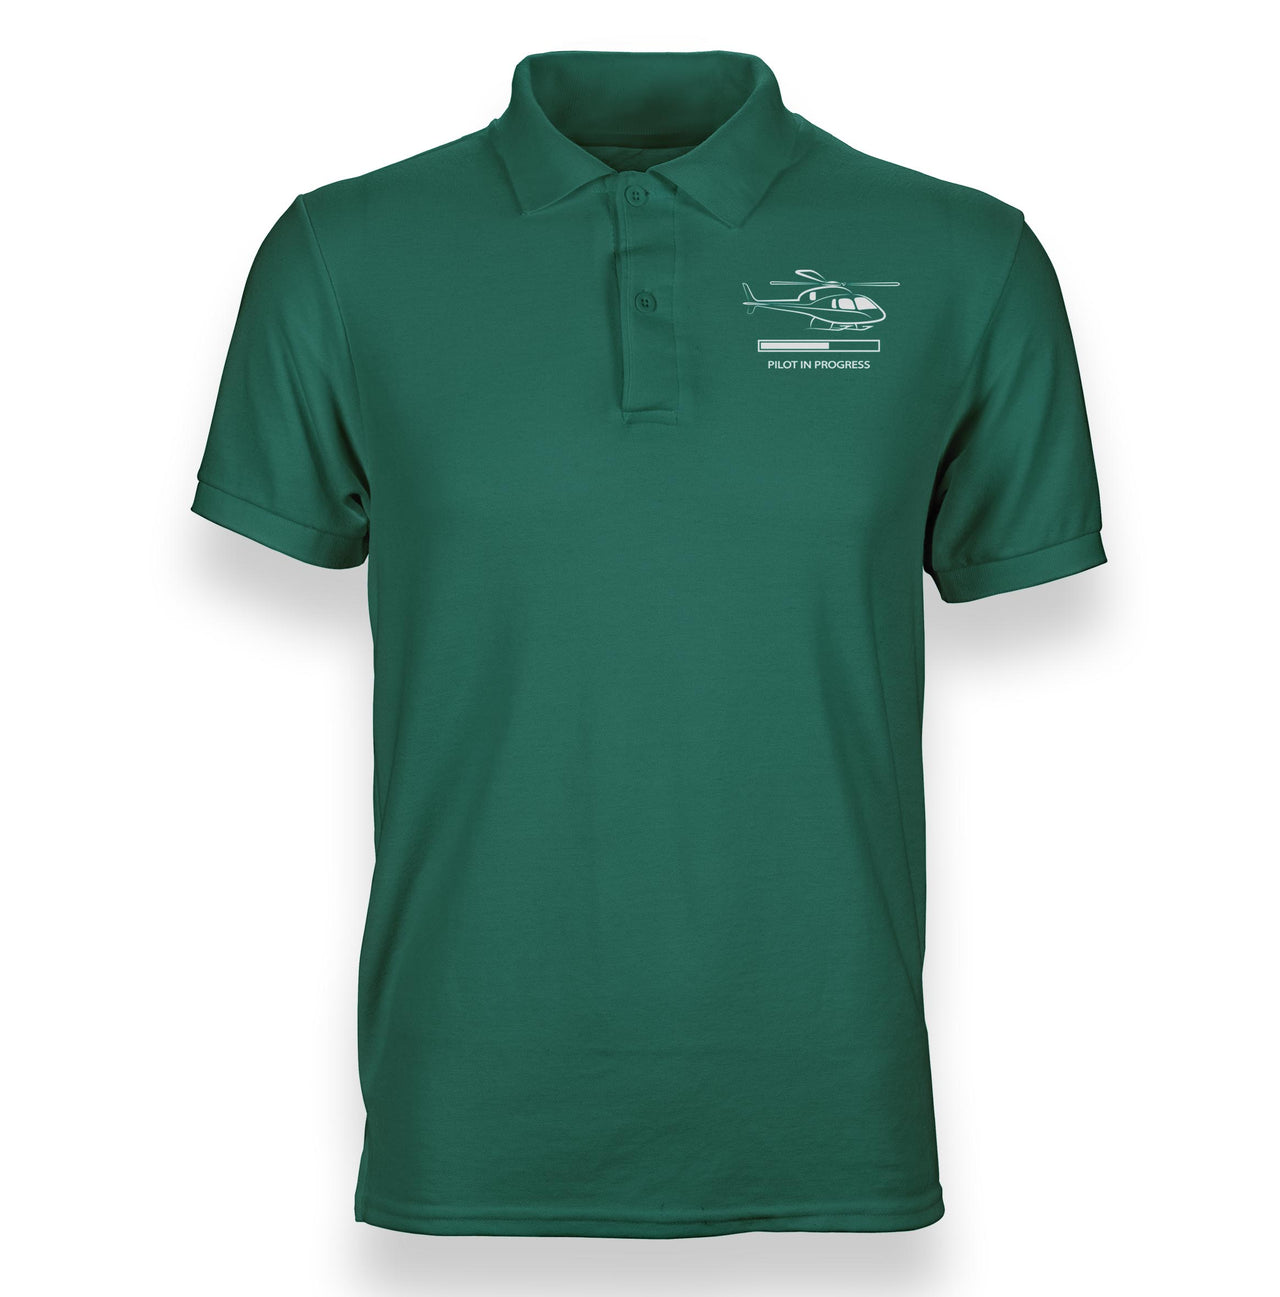 Pilot In Progress (Helicopter) Designed Polo T-Shirts